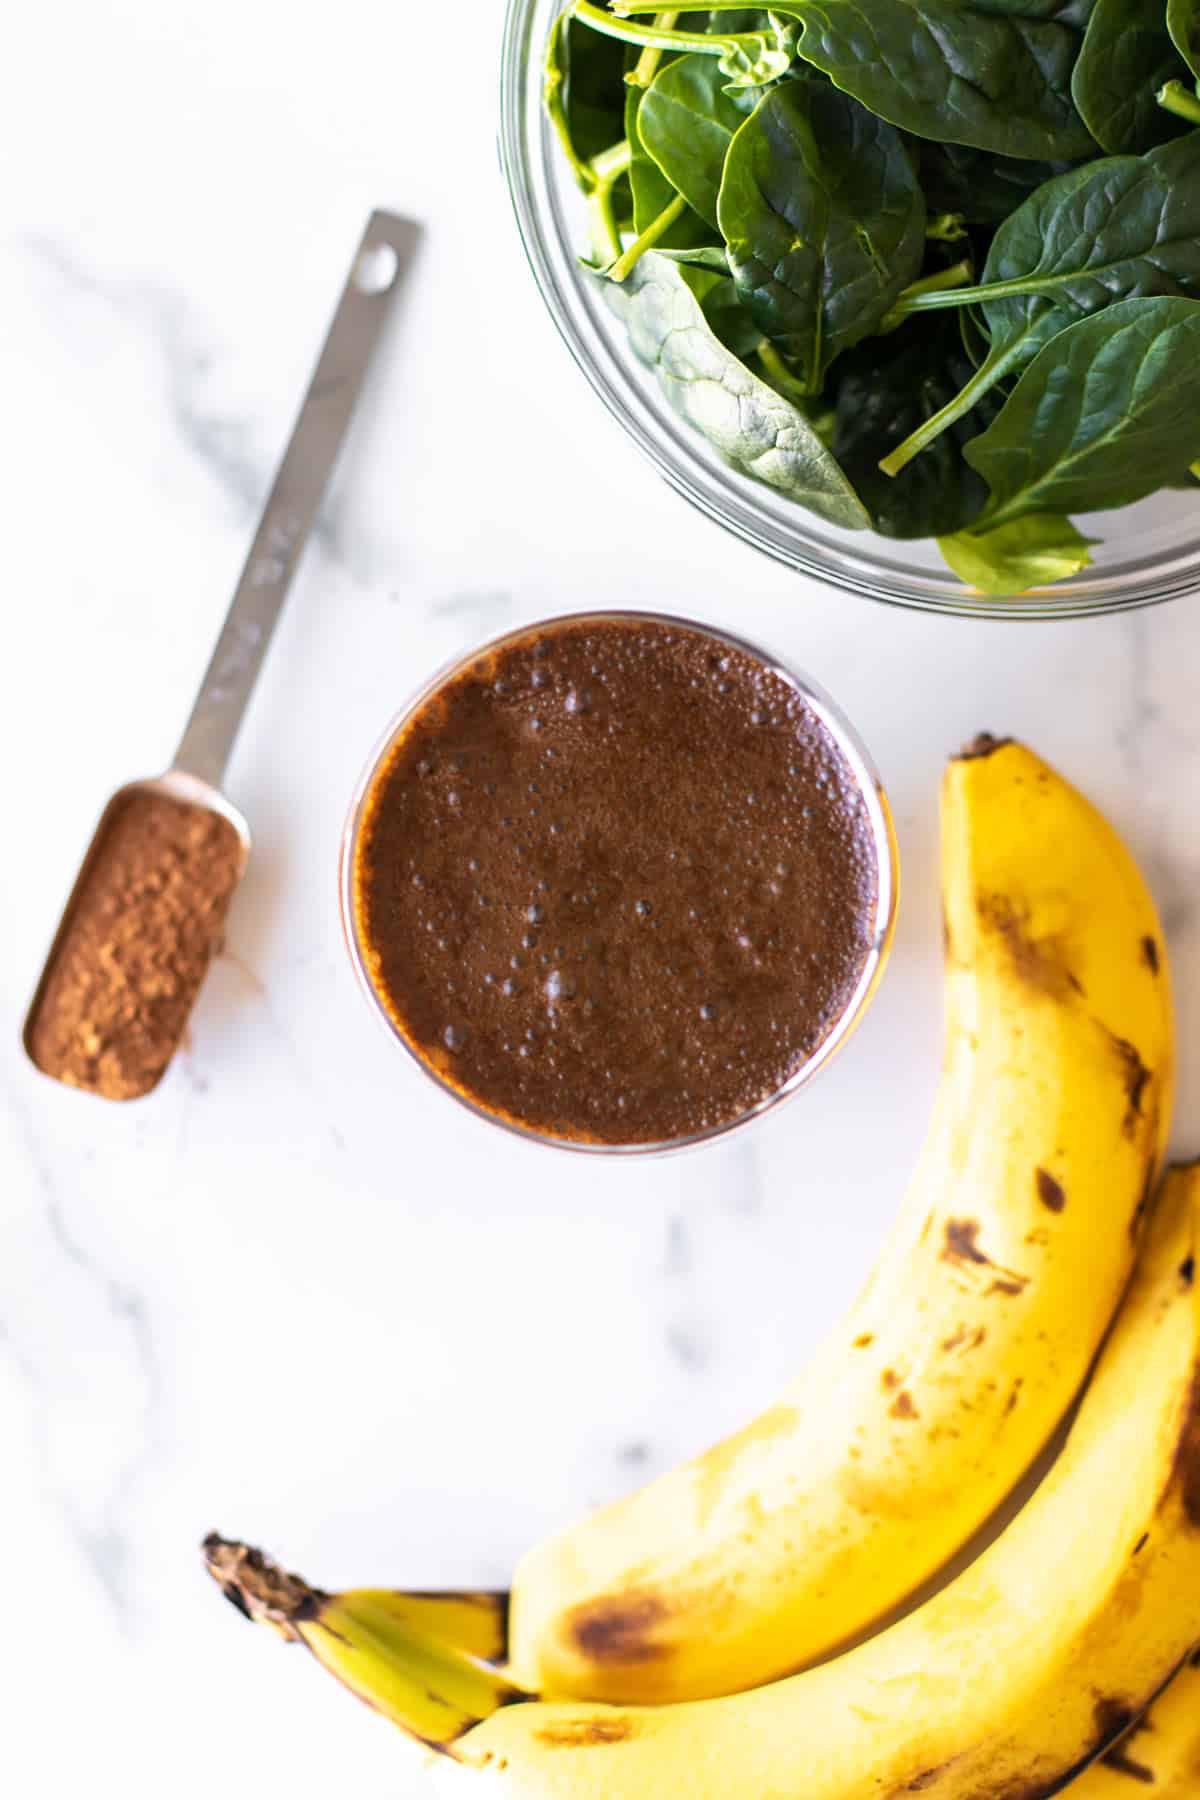 green coffee chocolate smoothie, bananas, spinach, and cocoa powder.